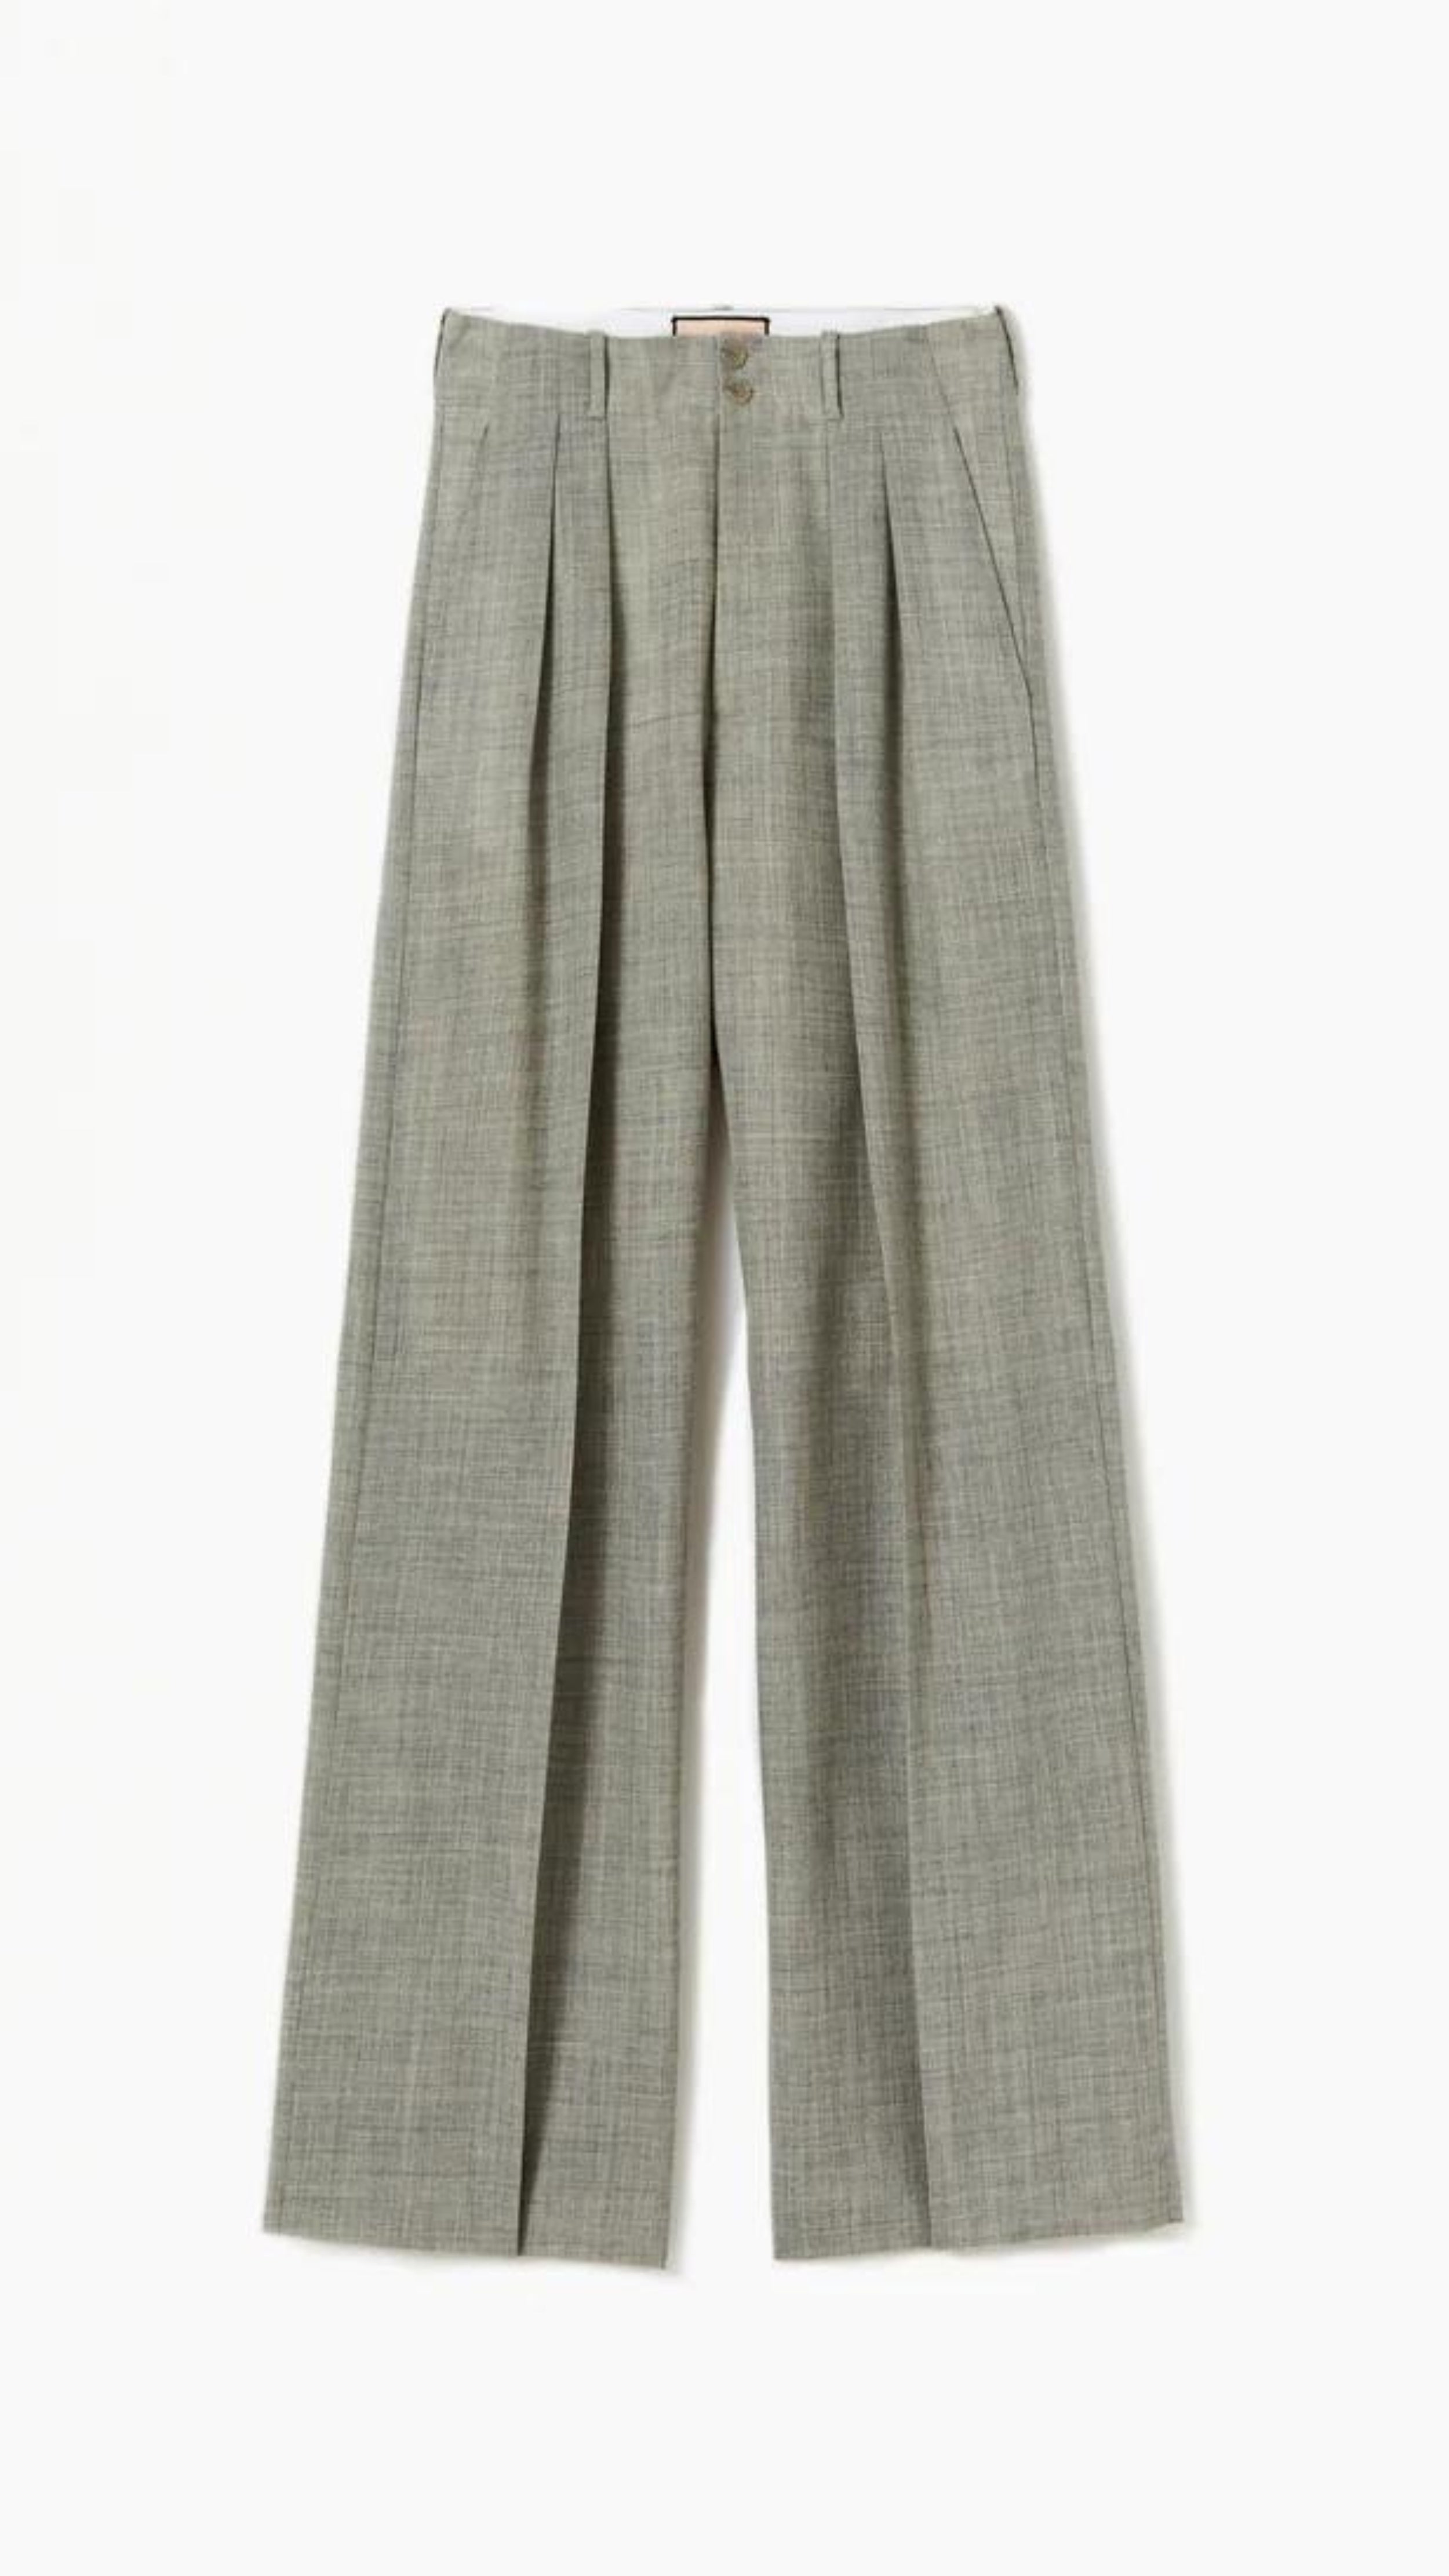 Plan C Pleated Melange Wide Leg Pants. tailored-cut and high-rise fit and wide leg trouser. With double pleating, button fastening closure, and pockets. Made in Italy from a light weight grey melange wool panama weave. Product photo shown from the front.